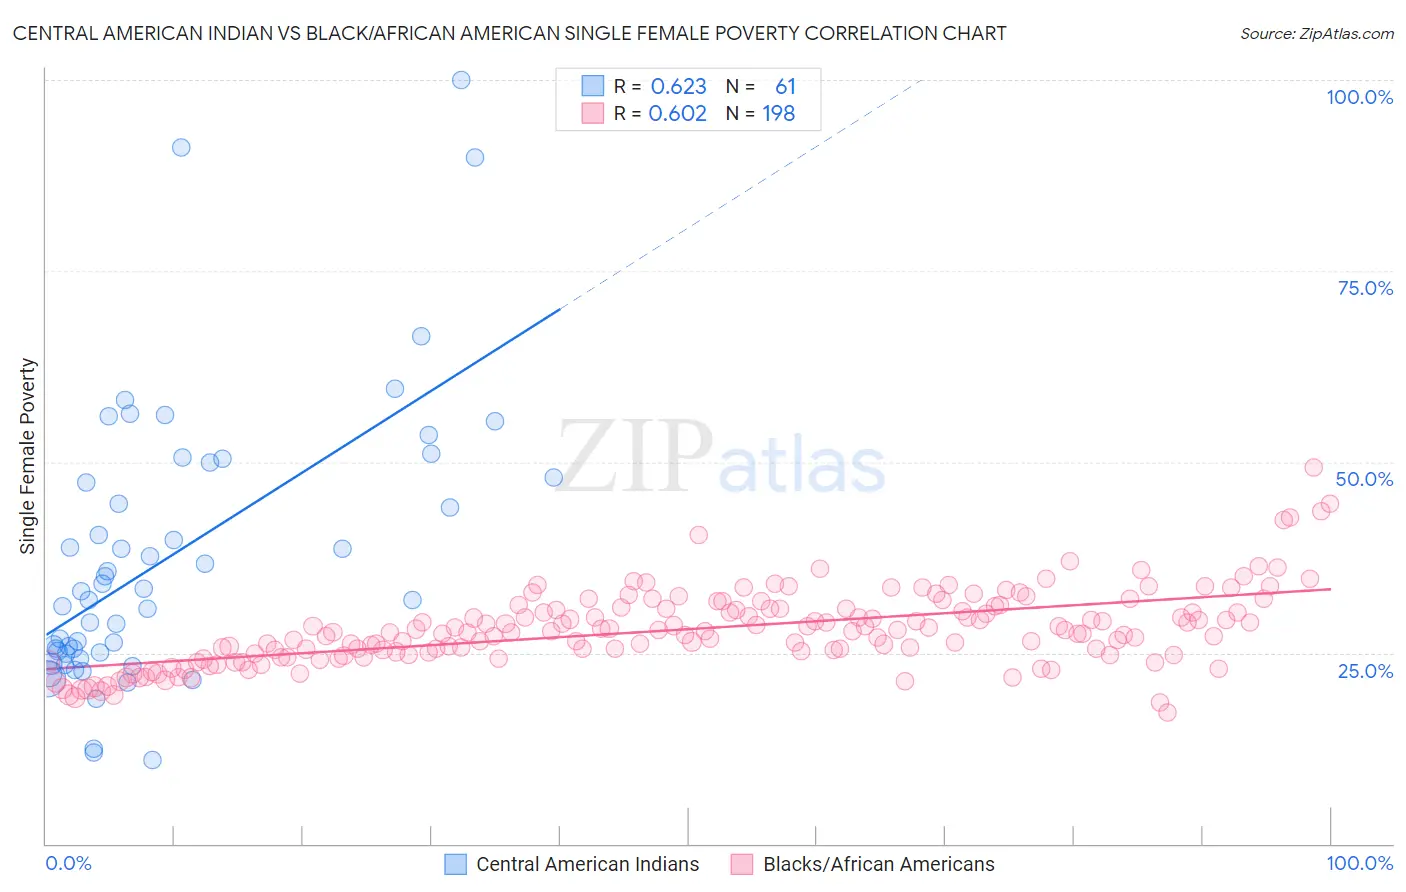 Central American Indian vs Black/African American Single Female Poverty